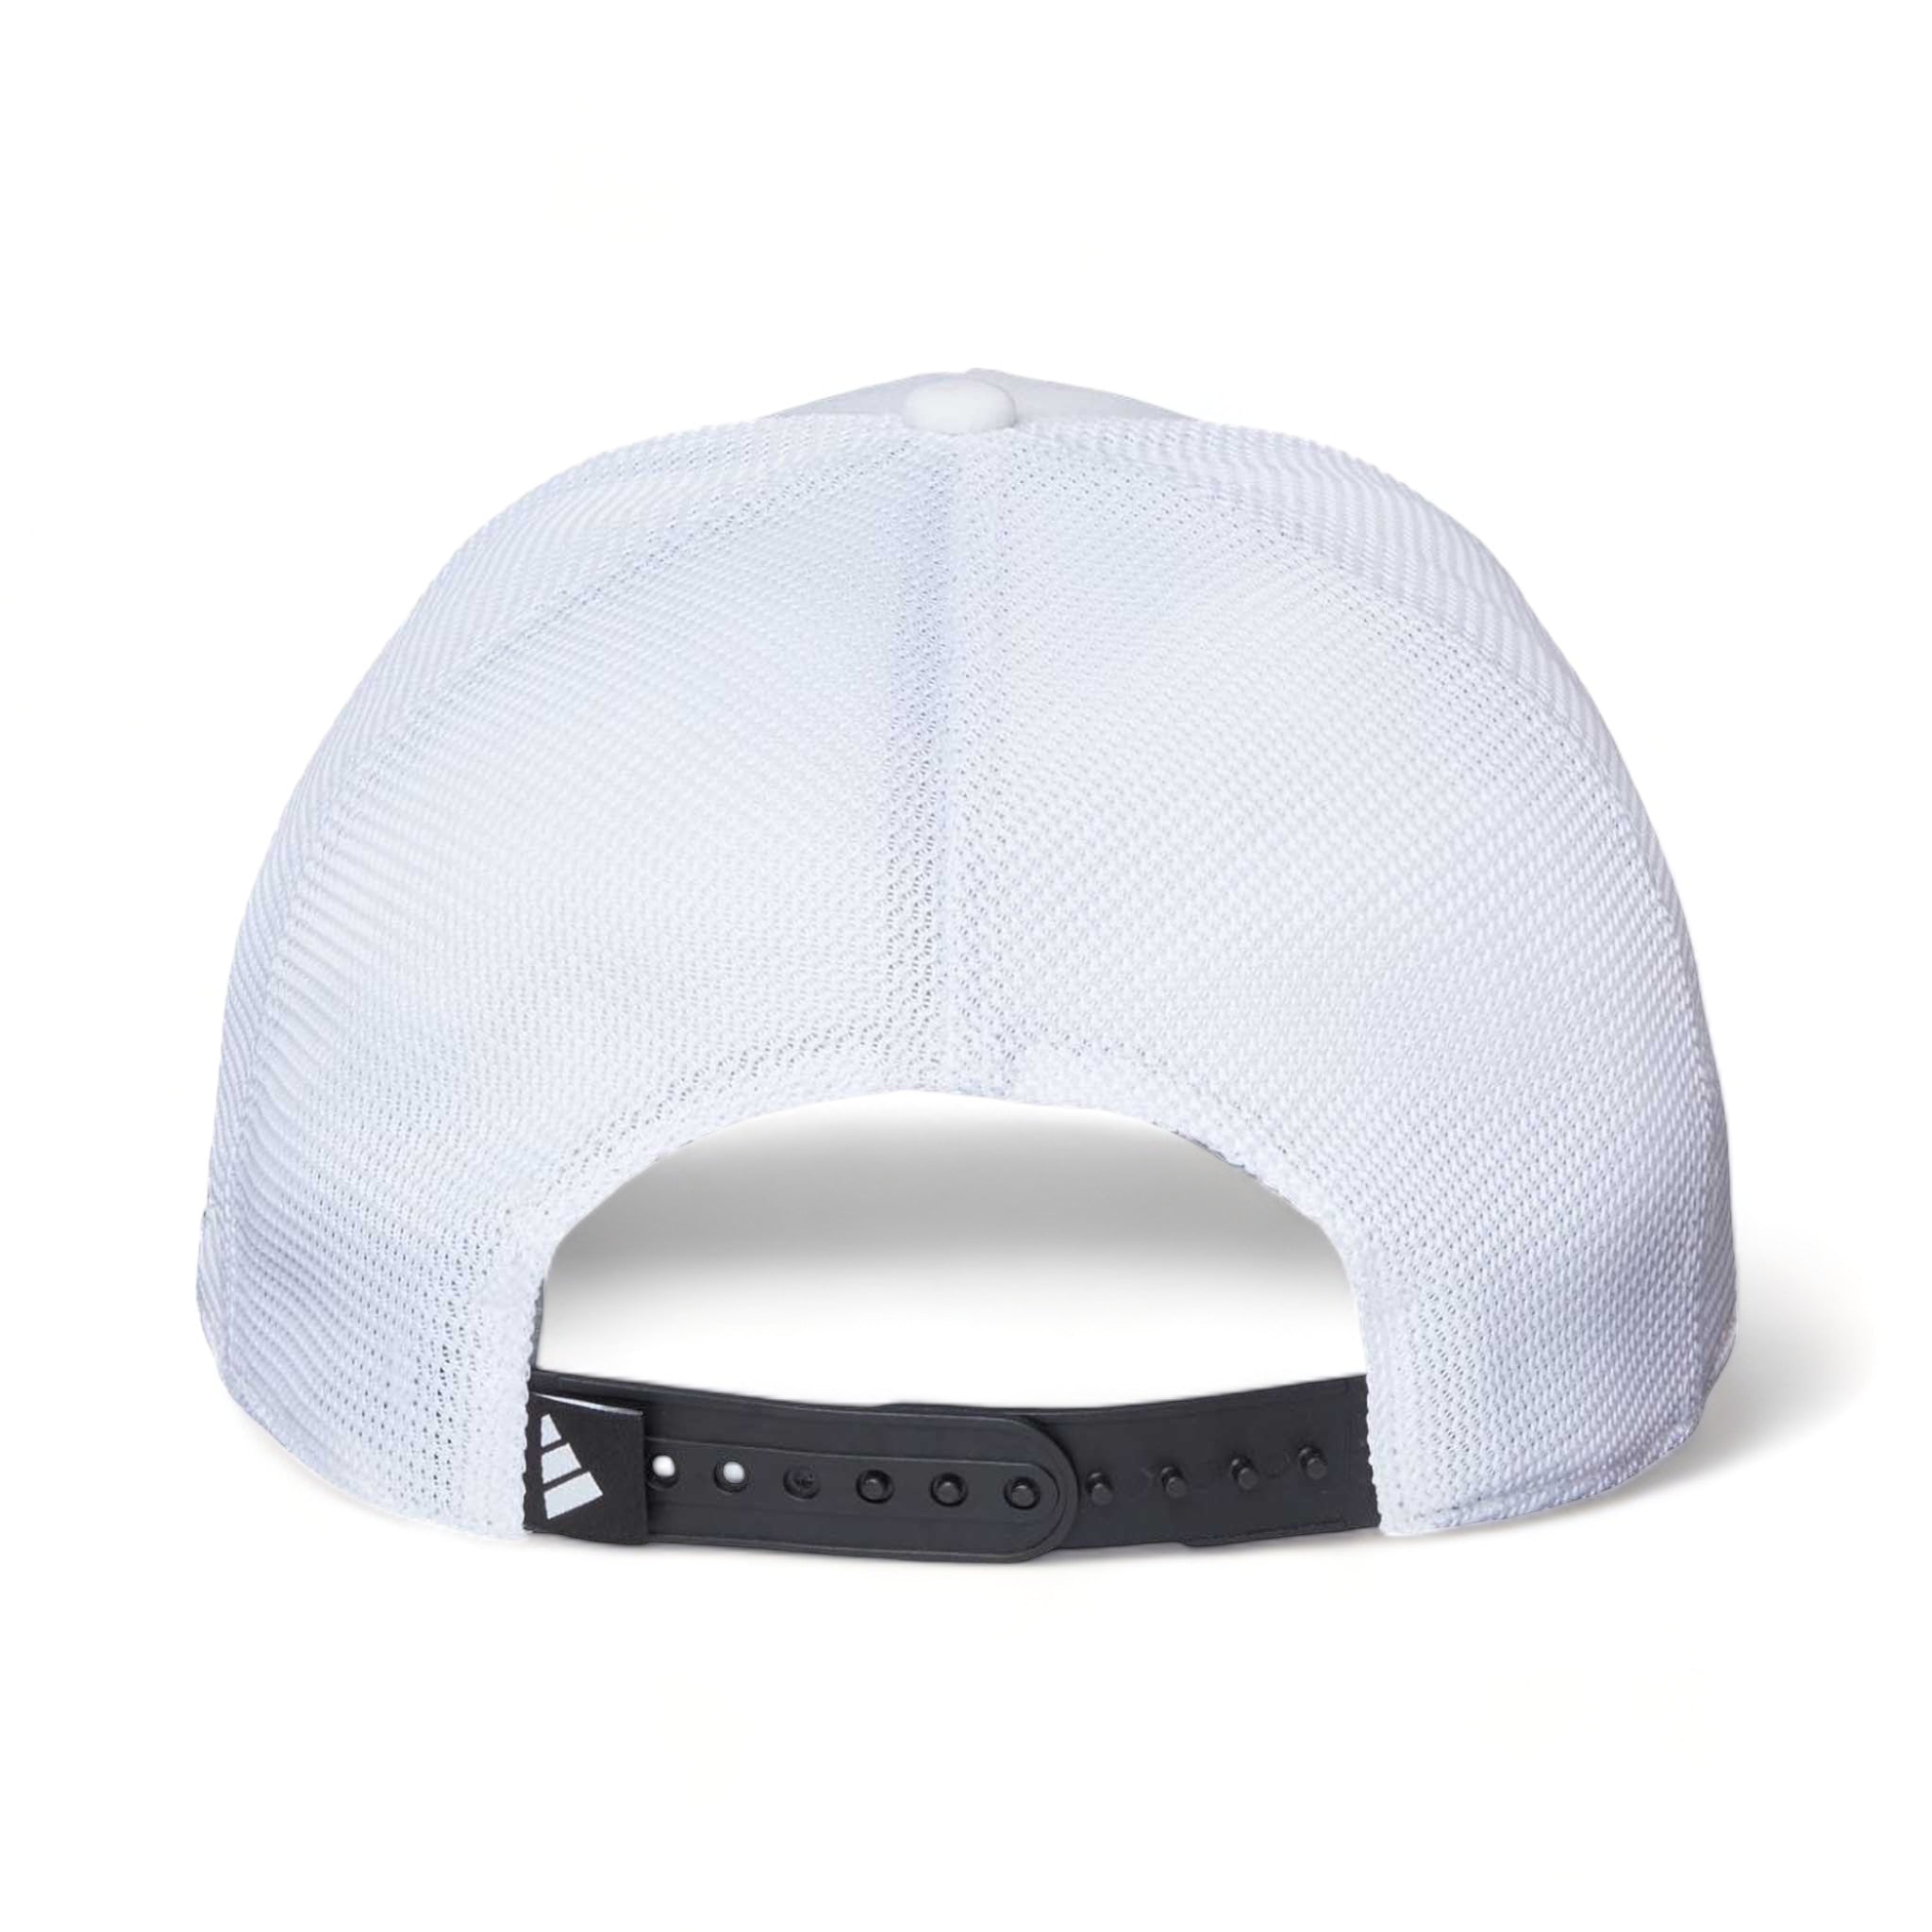 Back view of Adidas A627S custom hat in white